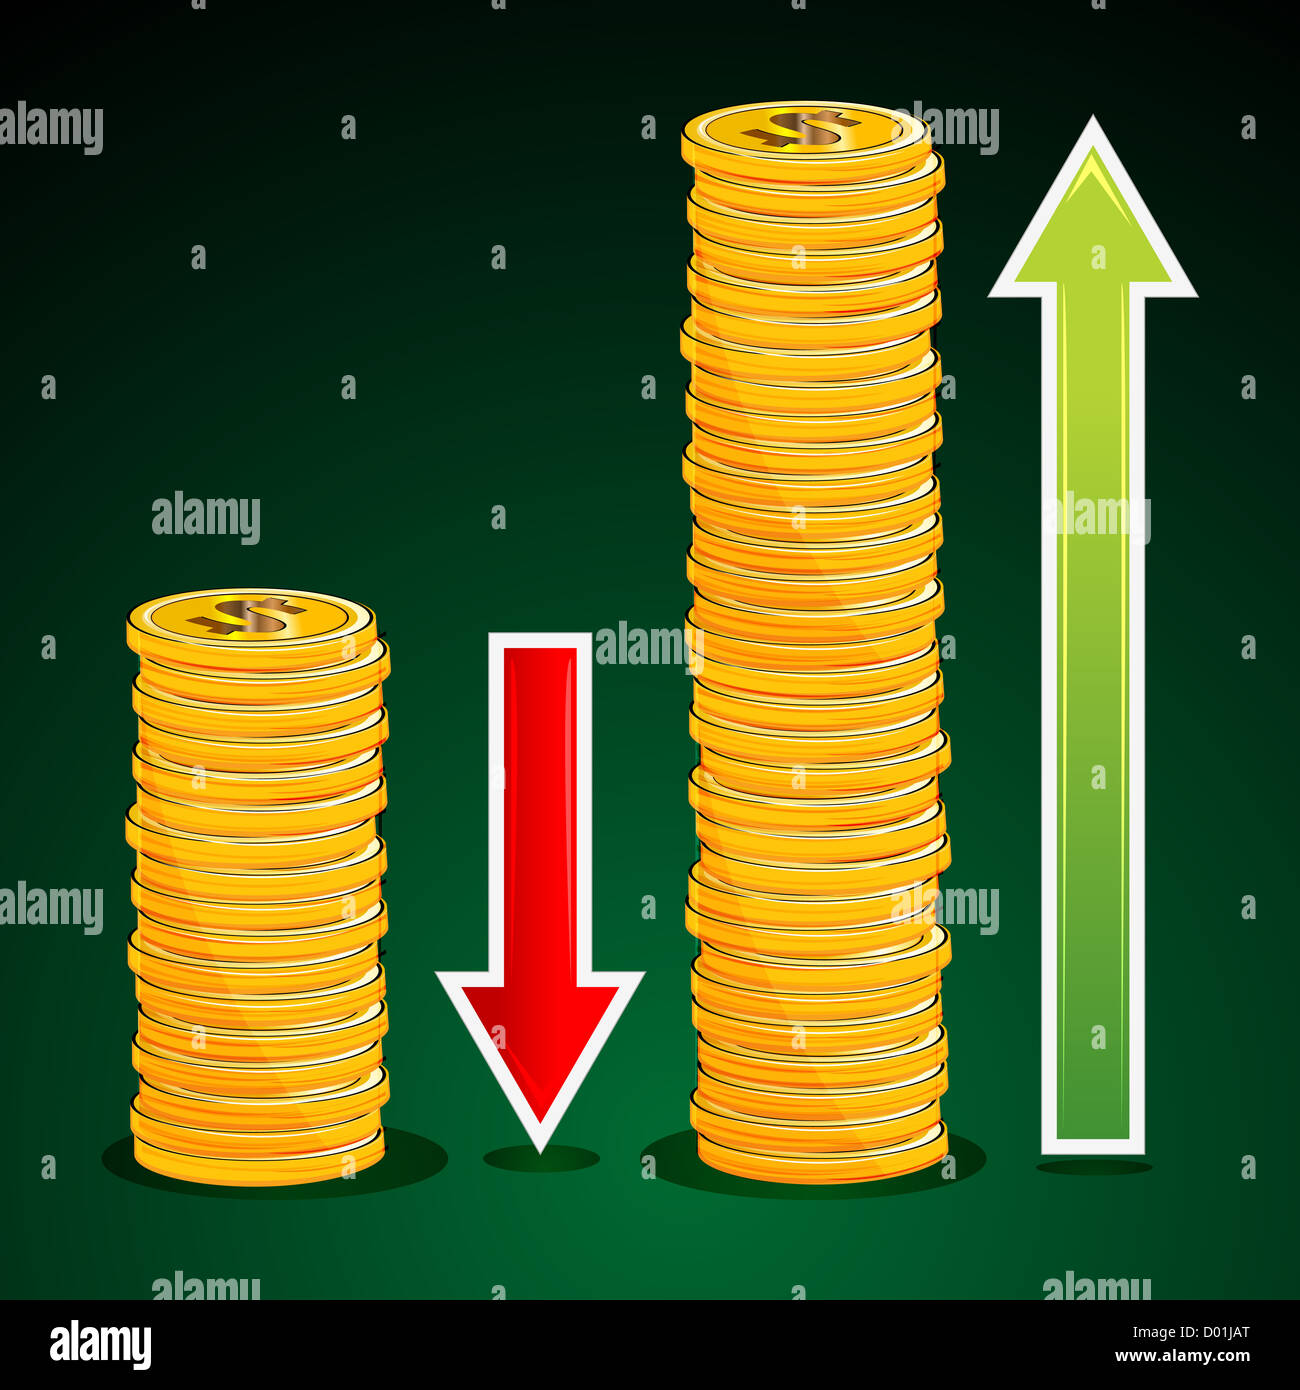 illustration of profit and loss presented by stack of dollar coins ...